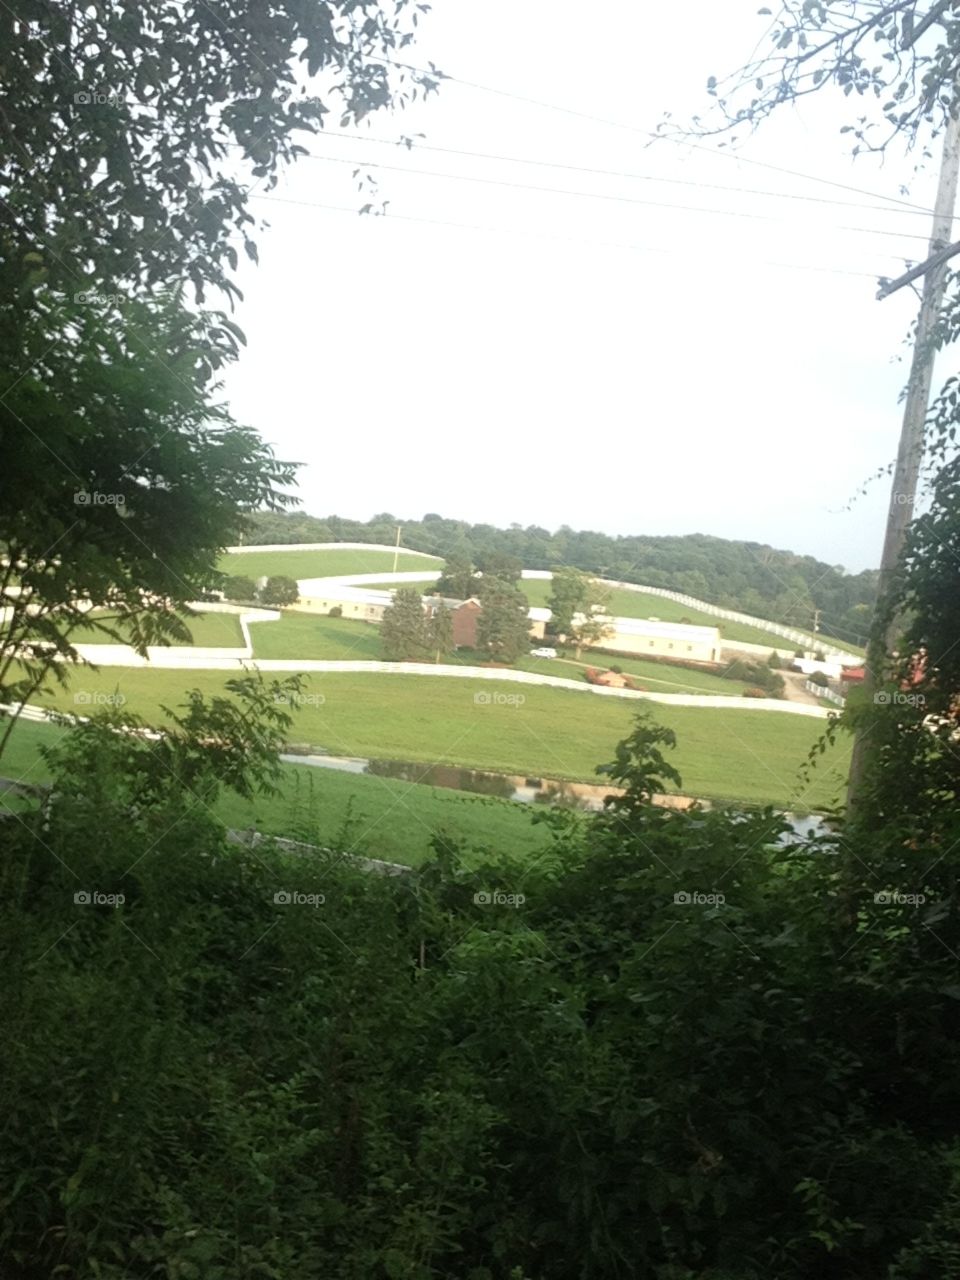 Picture of a Horse Farm